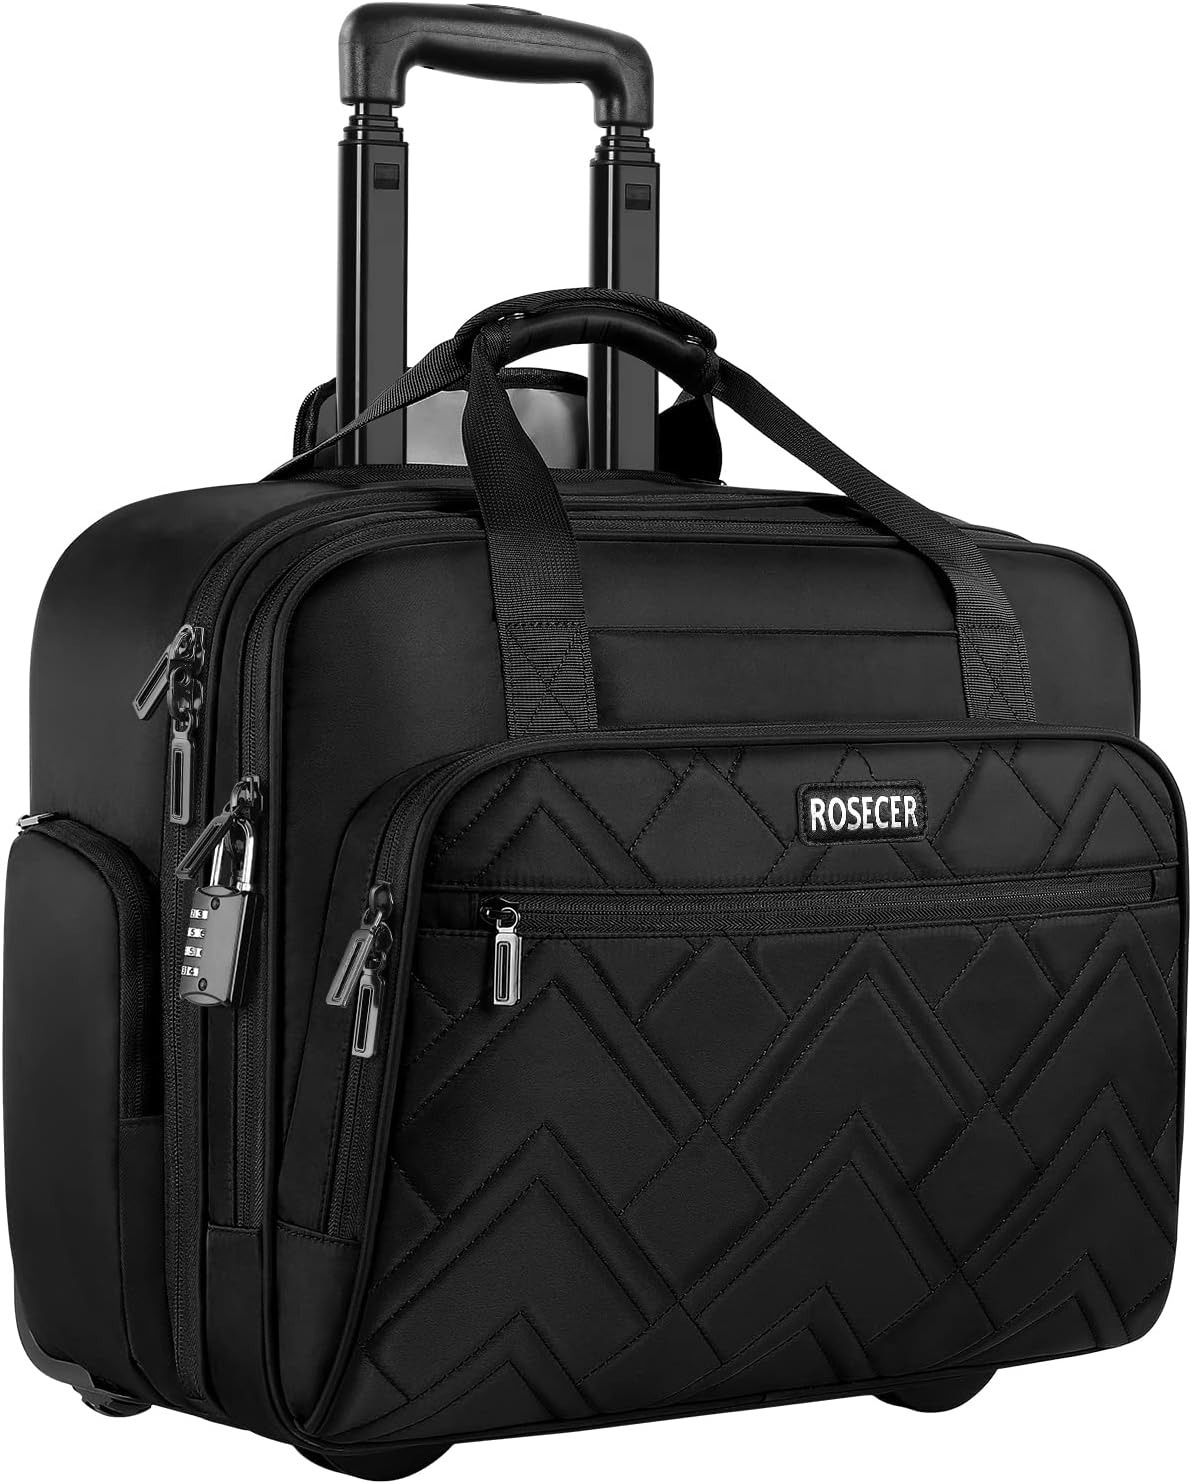 ROSECER Rolling Laptop Bag, 17.3 Inch Premium Laptop Briefcases with Wheels for